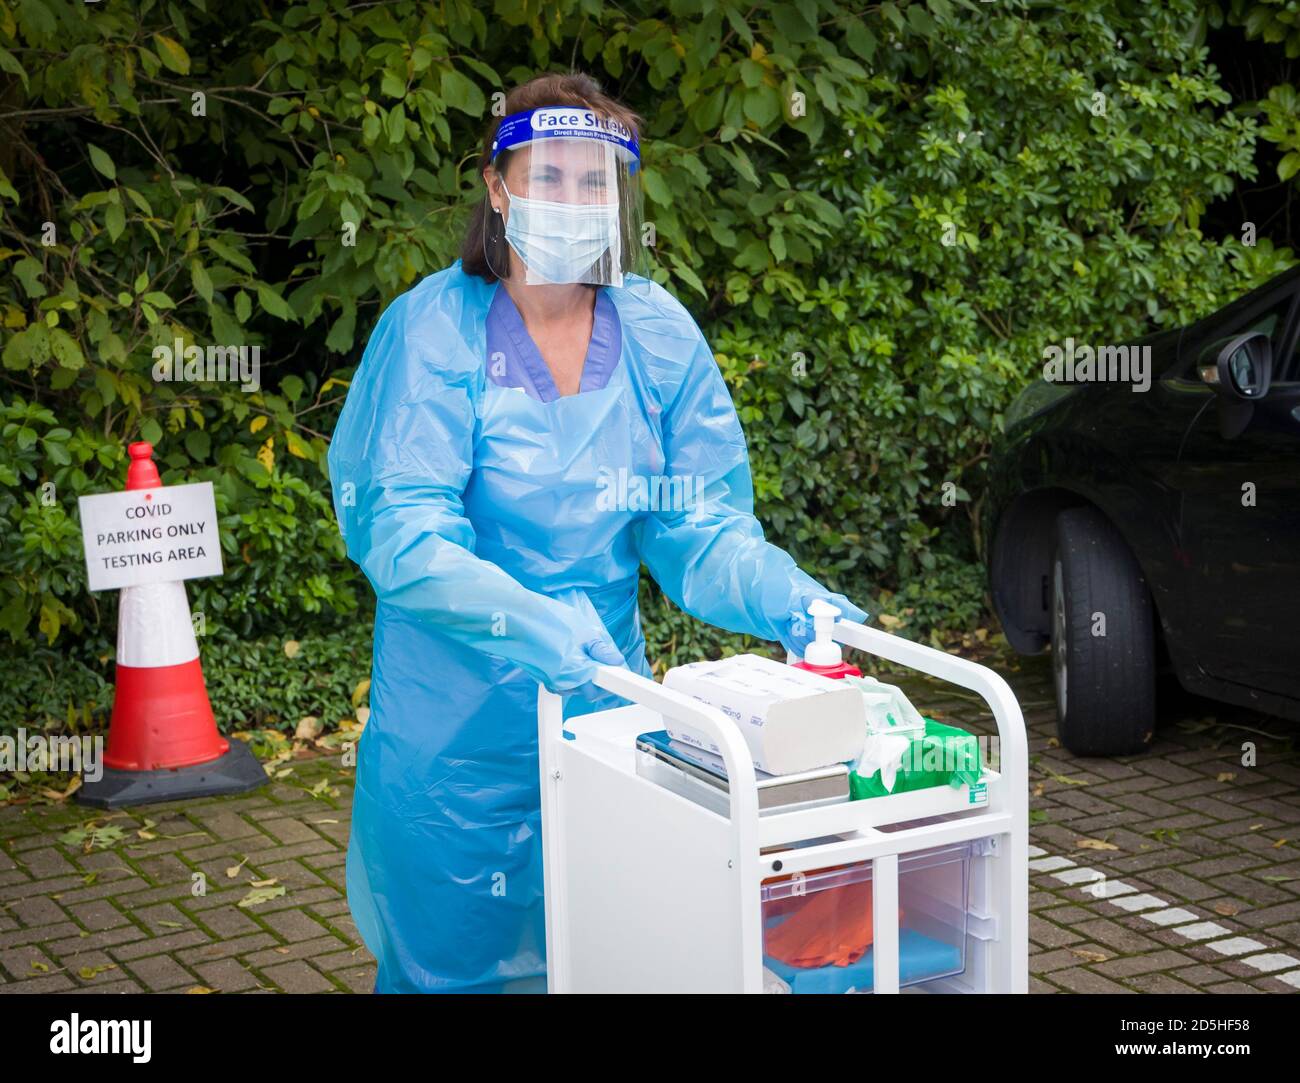 HARPENDEN, UK - October 05, 2020. Nurse wearing full PPE (personal protective equipment) at a Coronavirus or COVID-19 testing site, UK Stock Photo